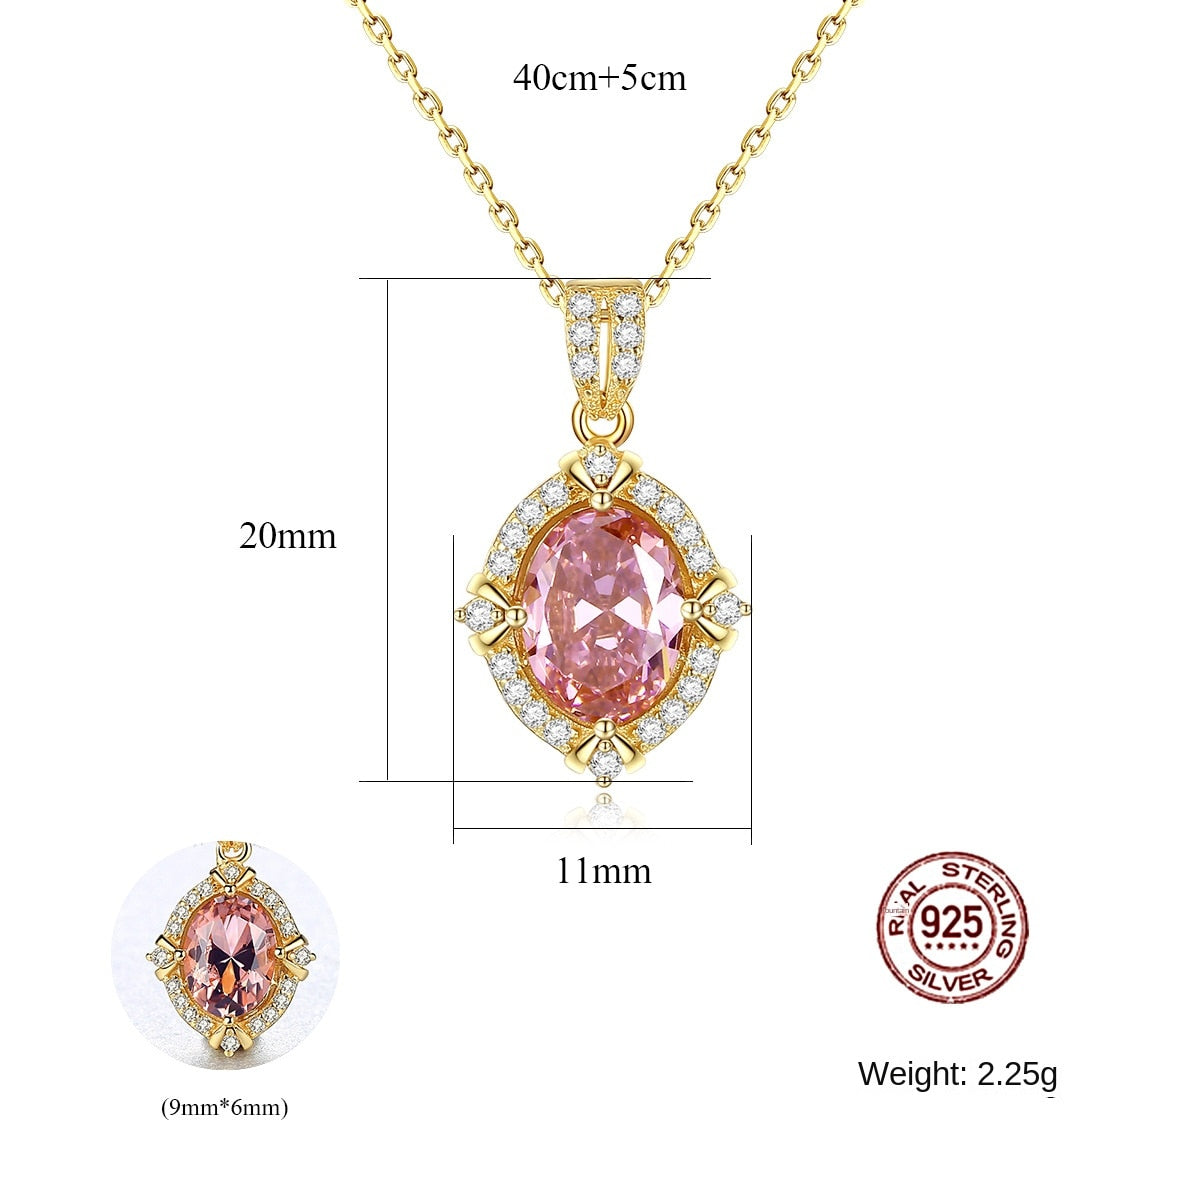 Gemstonely- Fashionable and Elegant: S925 Silver Necklace with Micro-Inlaid Colored Gemstone Pendant for Women